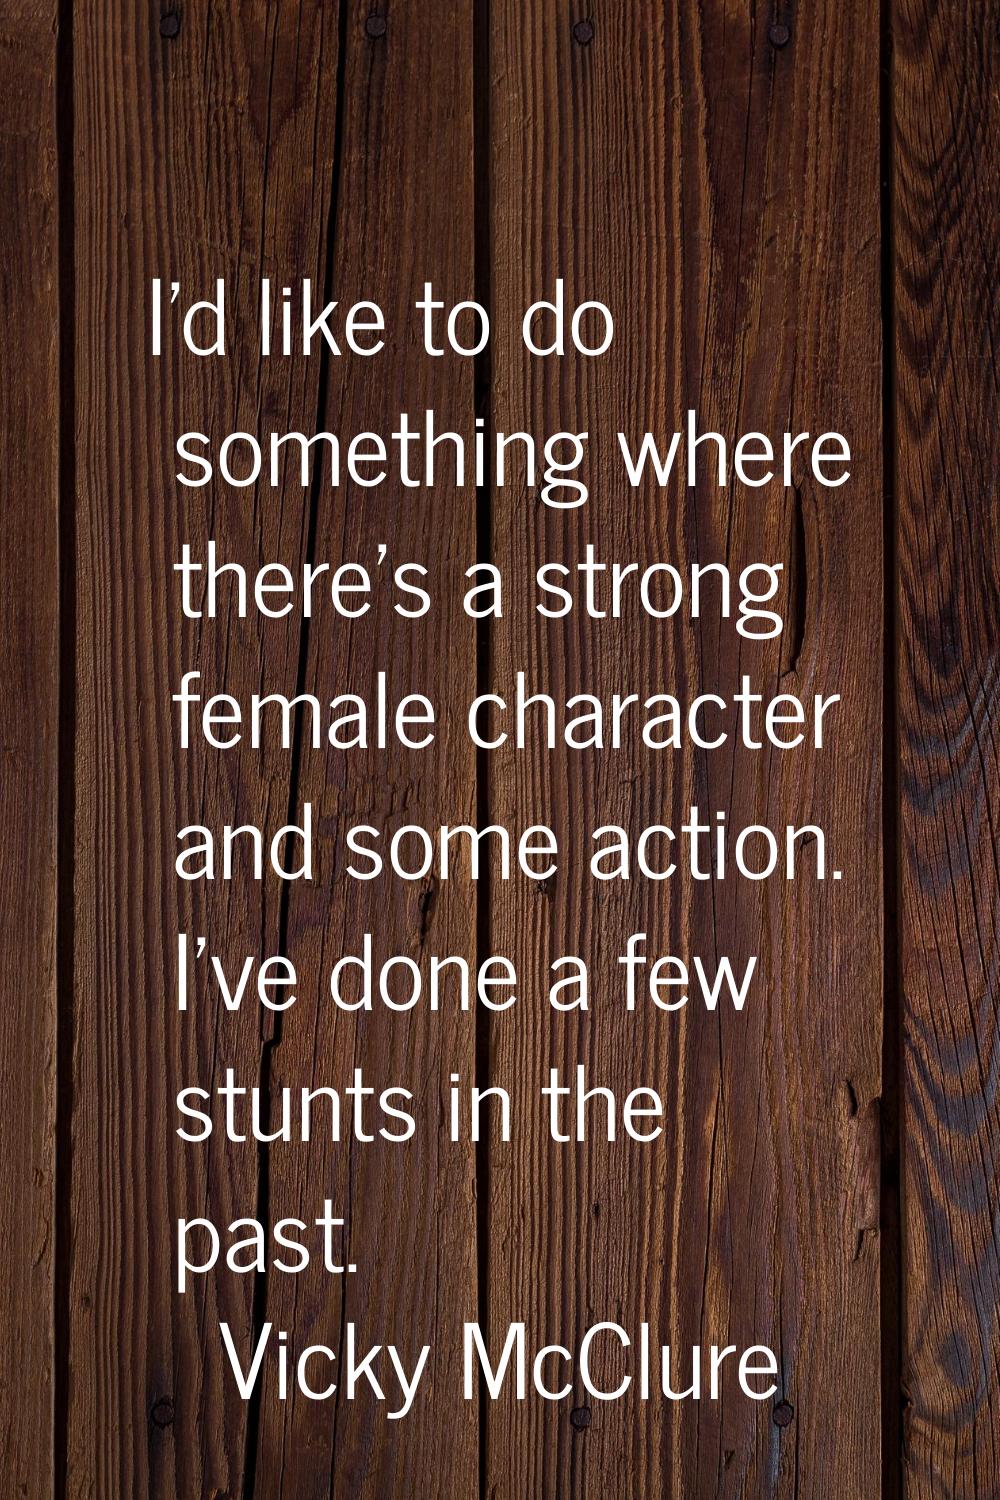 I'd like to do something where there's a strong female character and some action. I've done a few s